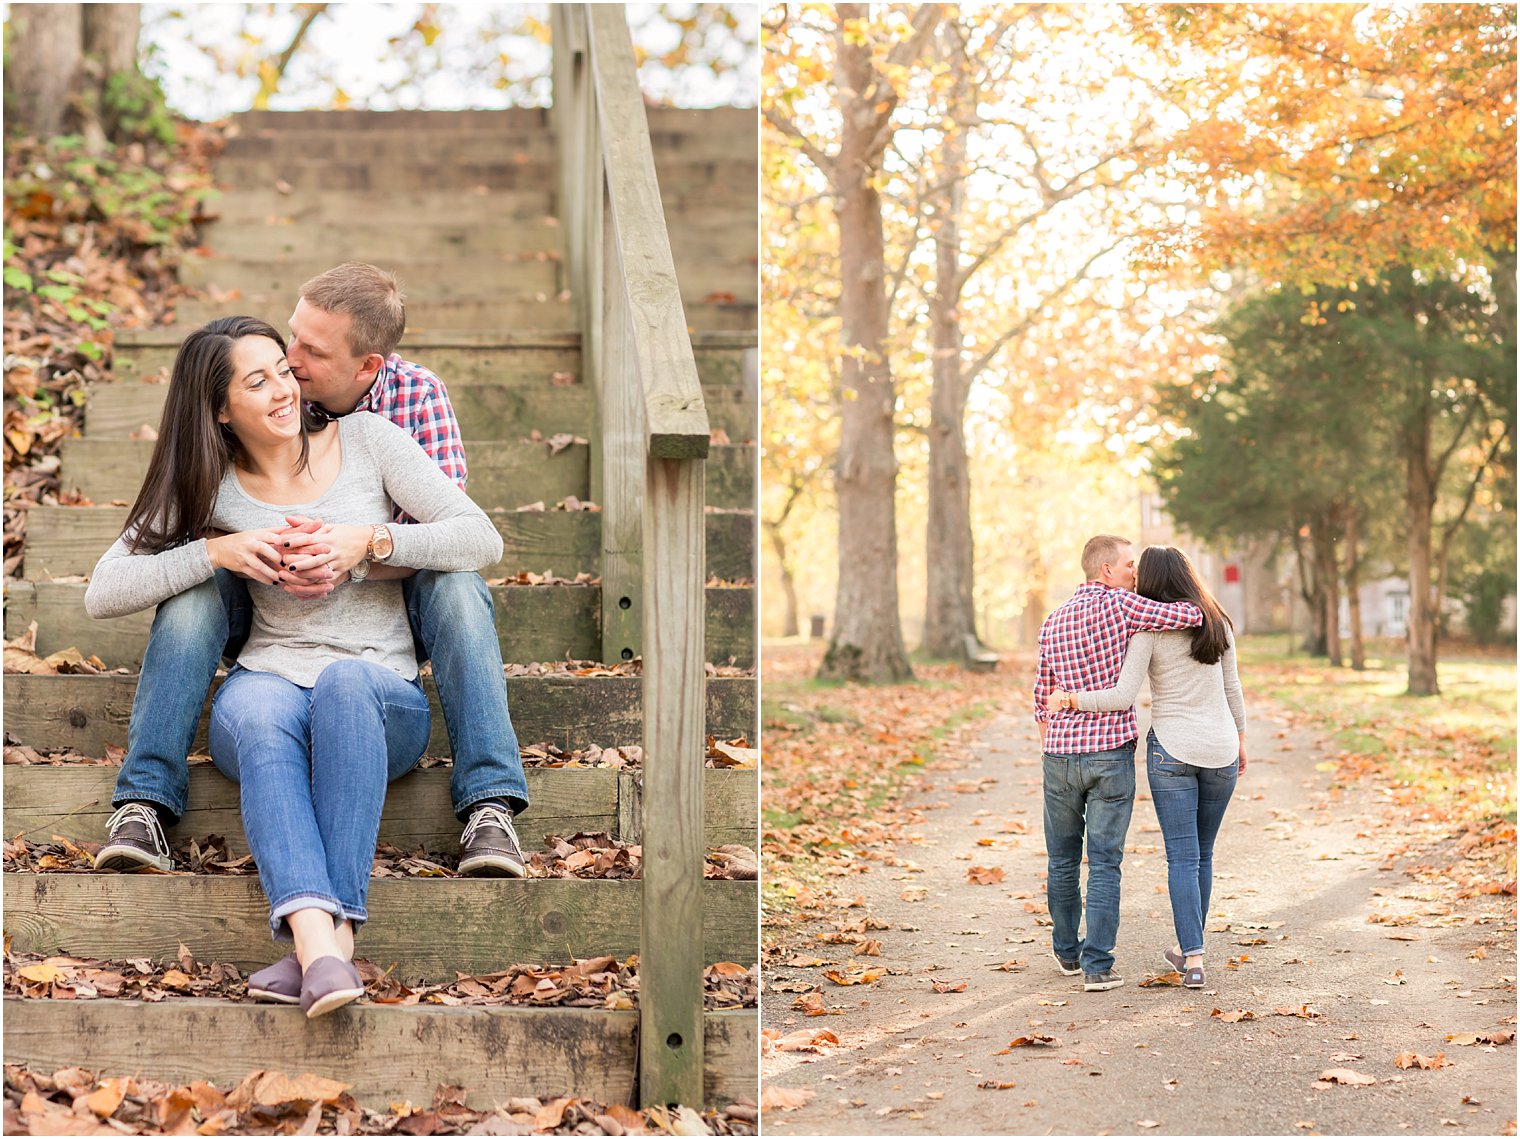 Candid style engagement photos